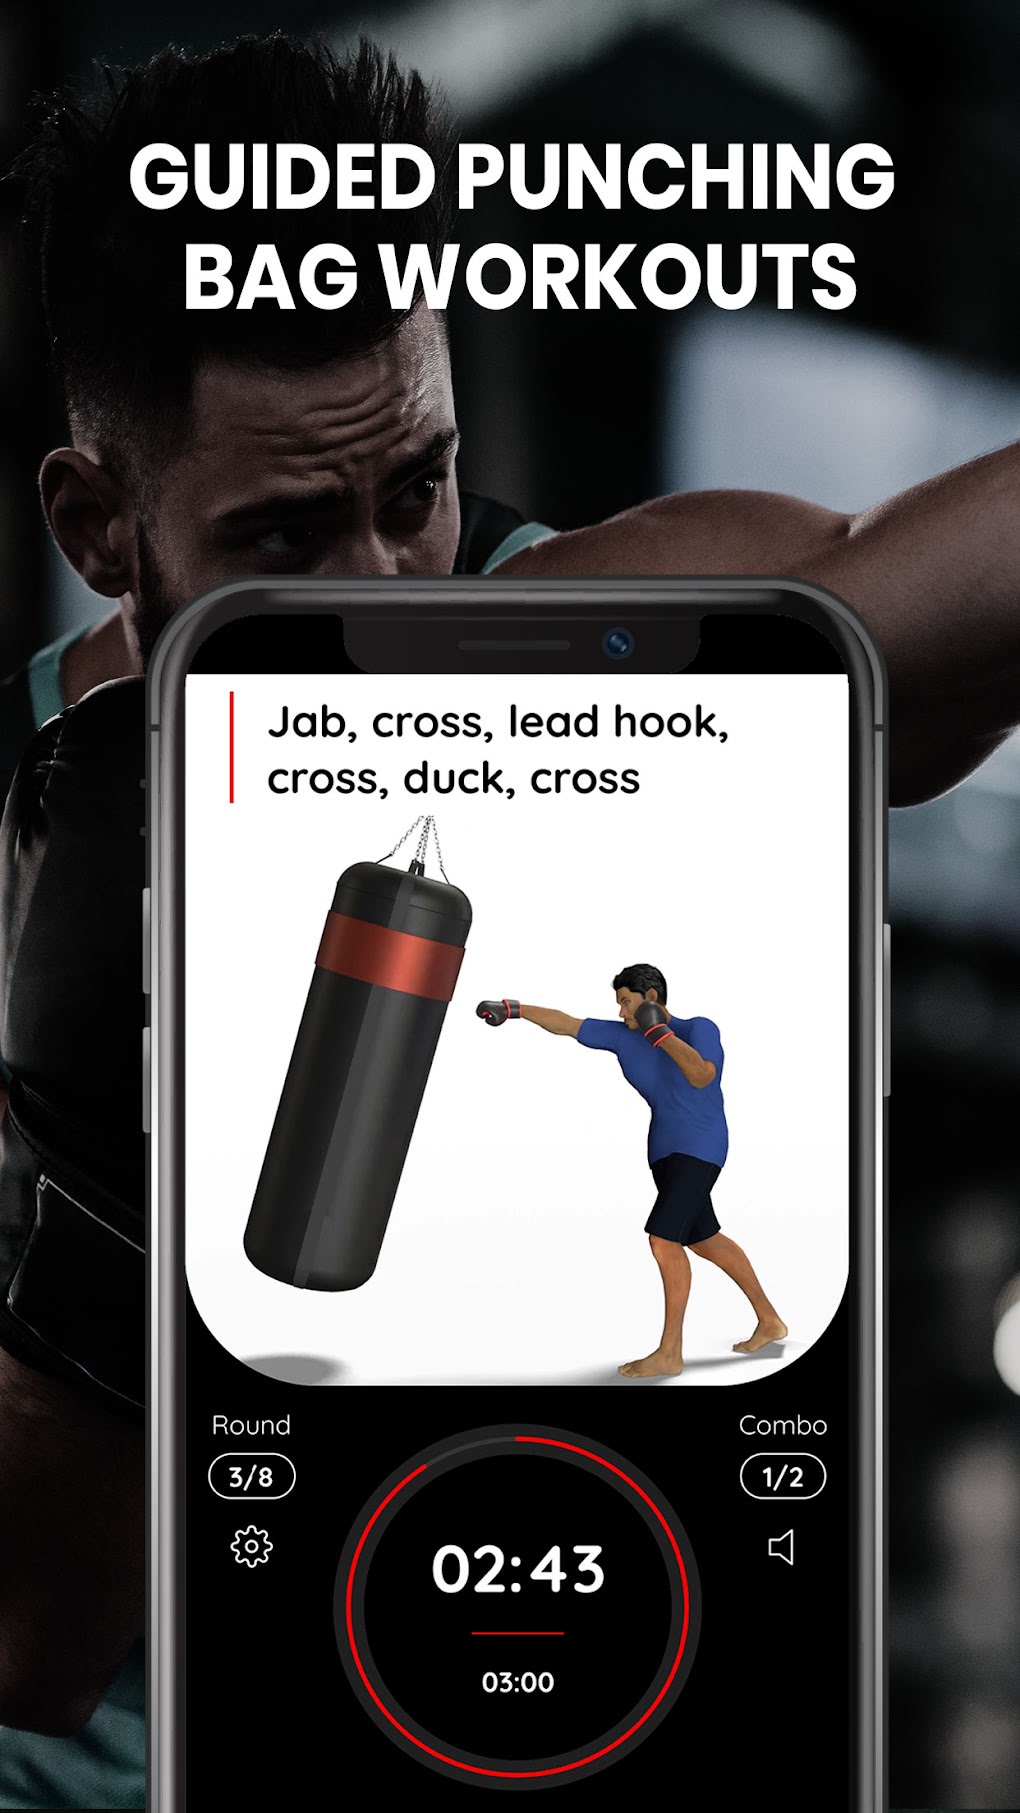 Punch Bag Workout Tips That Improve Boxing Performance – Hungry4Fitness